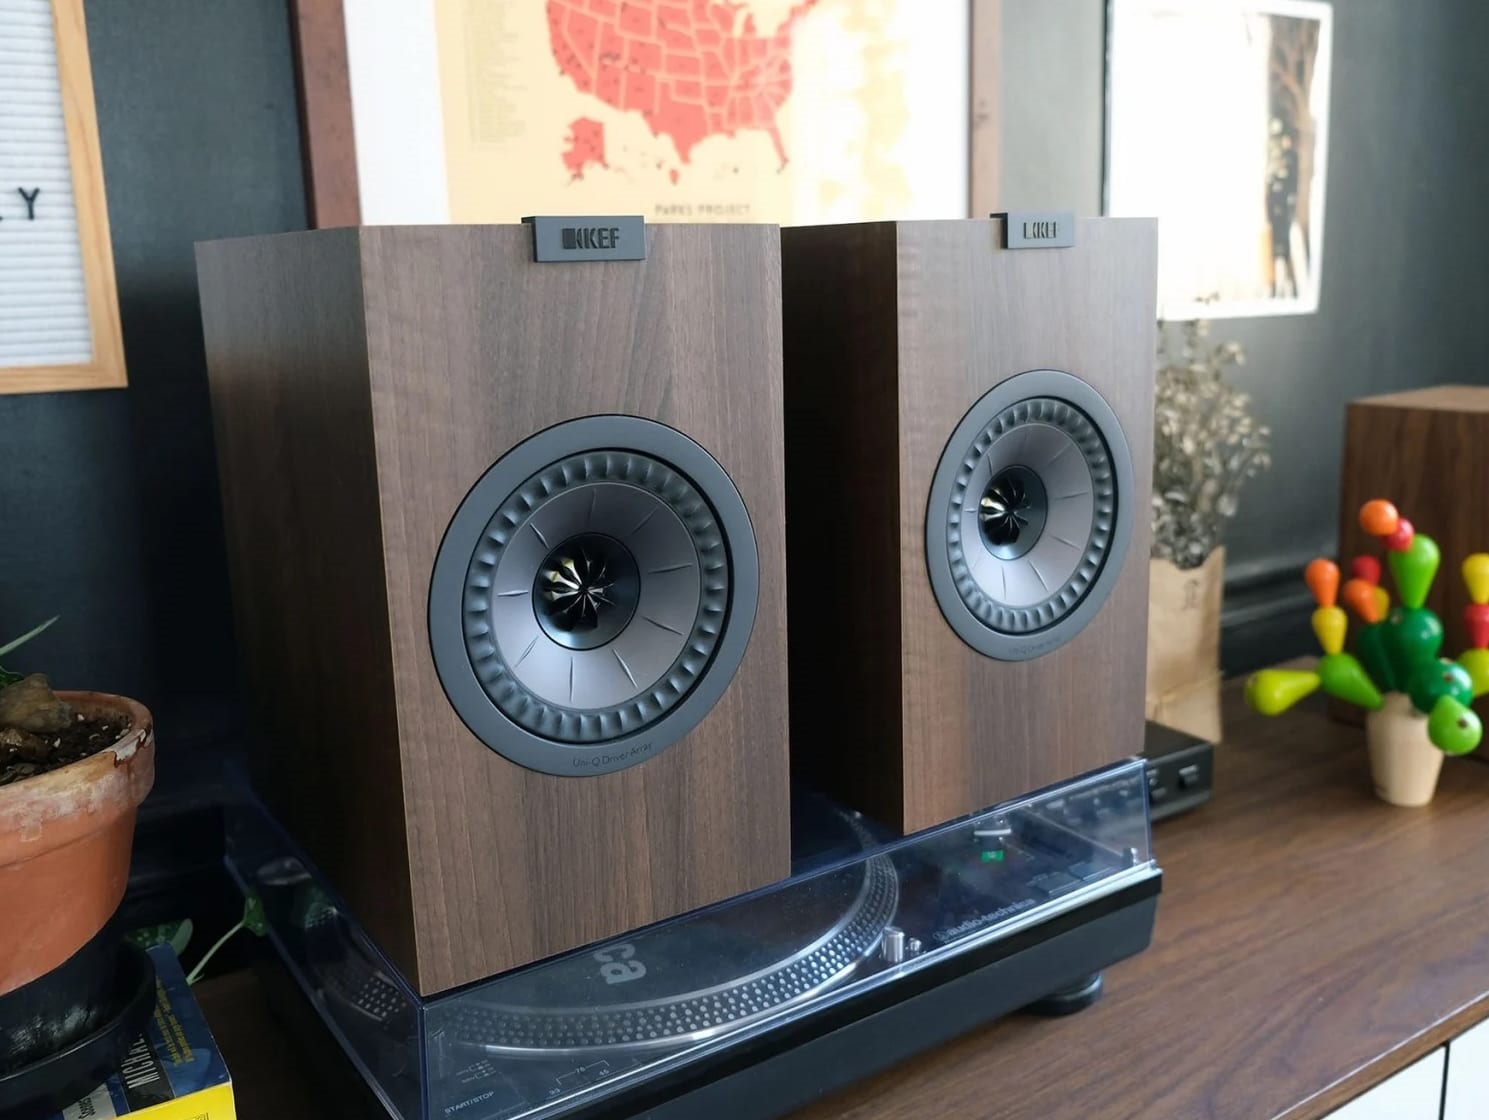 The best passive bookshelf speakers for most people | DeviceDaily.com